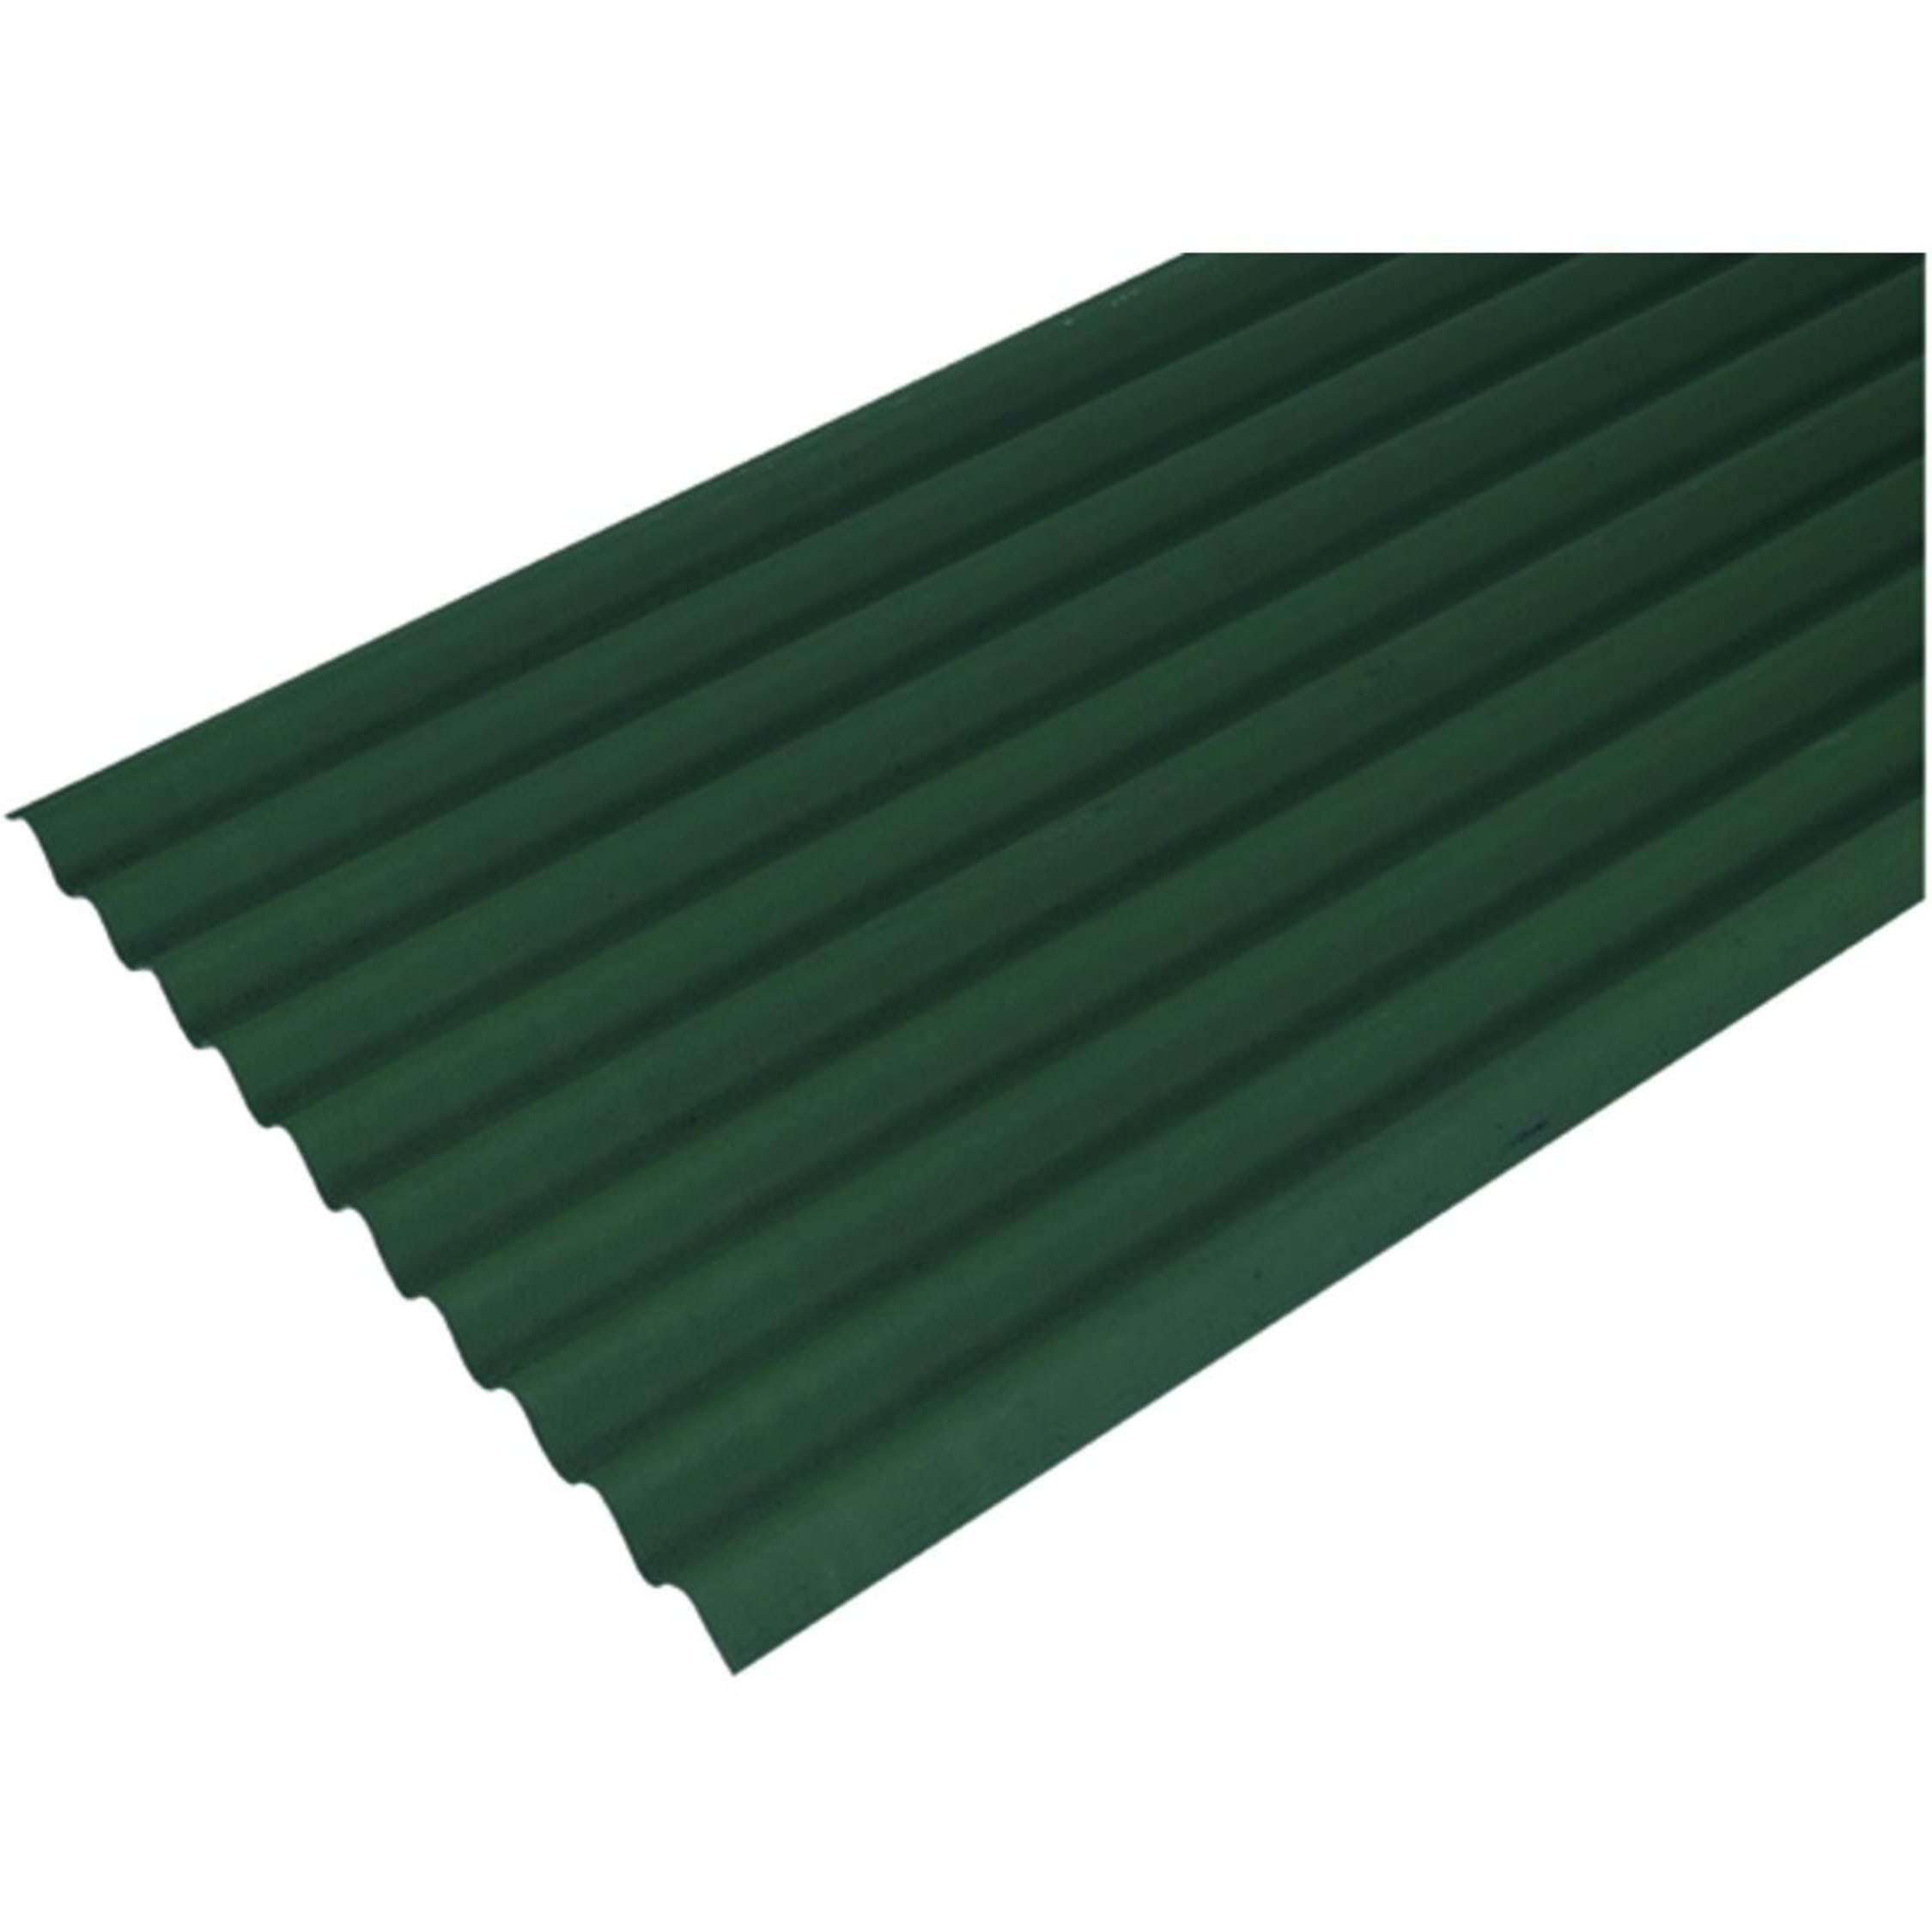 Green Bitumen Corrugated Roof Sheet, Corrugated Metal Roofing Sheets Wickes